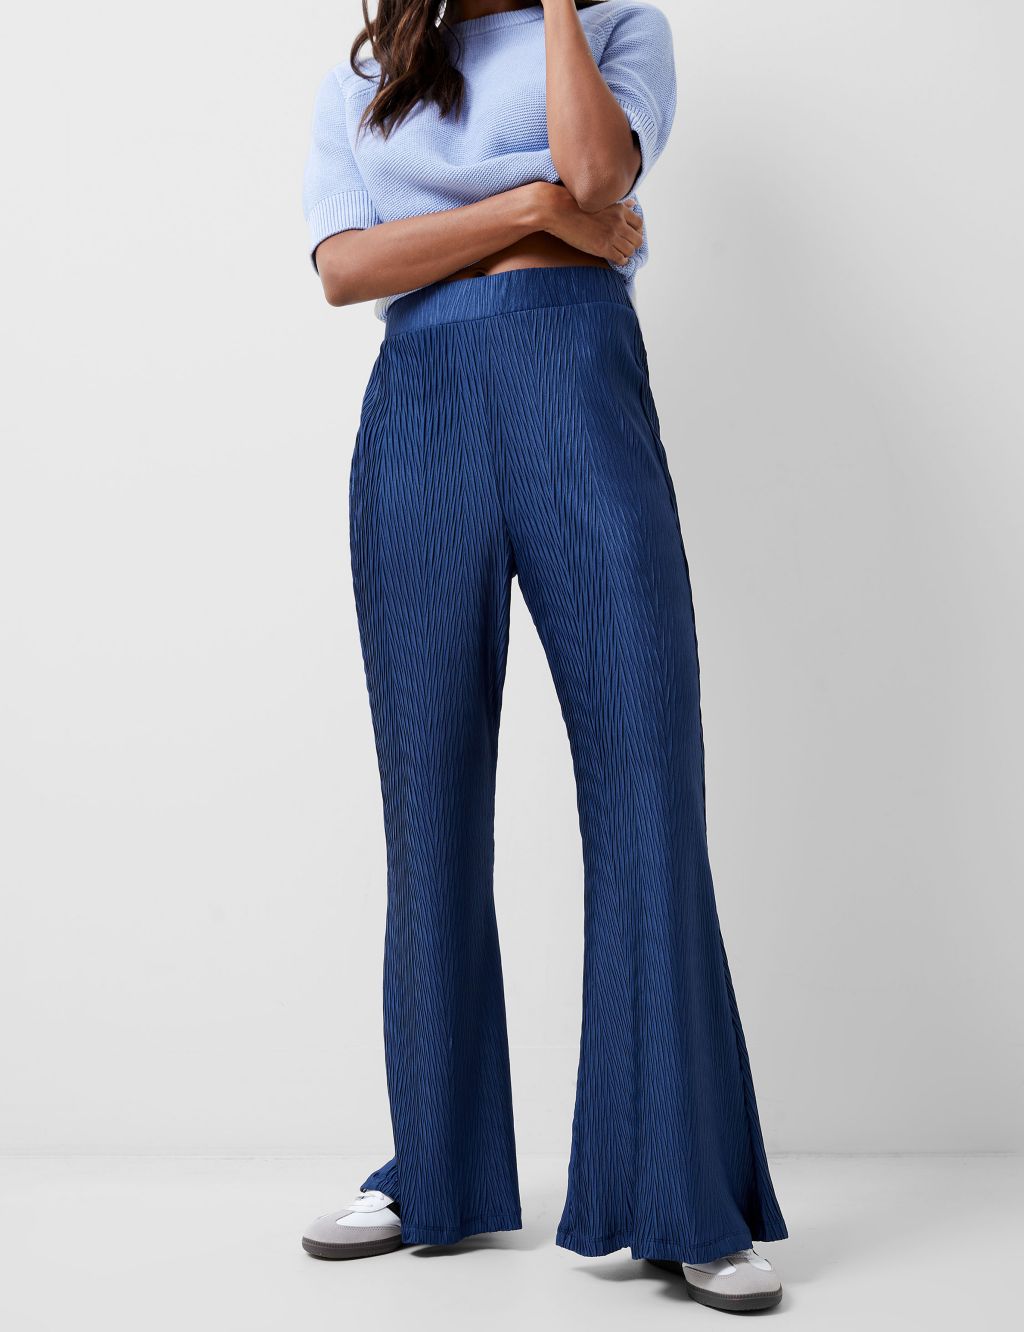 Textured Straight Leg Flared Trousers image 3